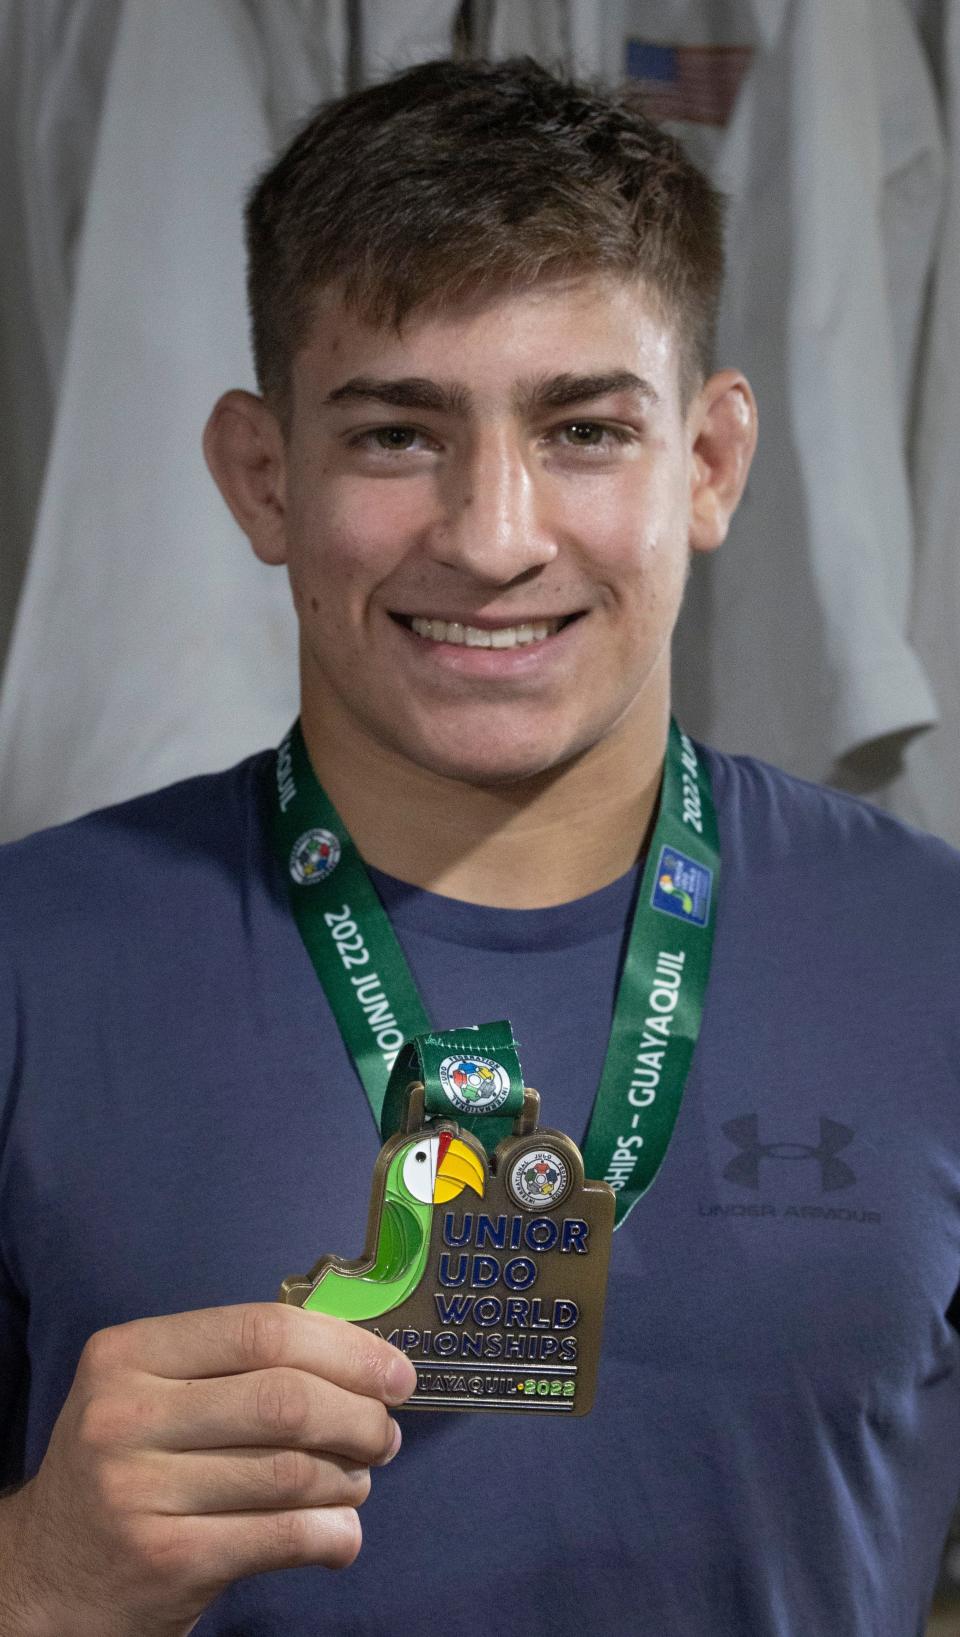 Jack Yonezuka, 19, is the first American in 30 years to earn a medal in the junior world championships. The Yonezuka family, who are all outstanding in Judo, at their West Long Branch home on August 30, 2022.